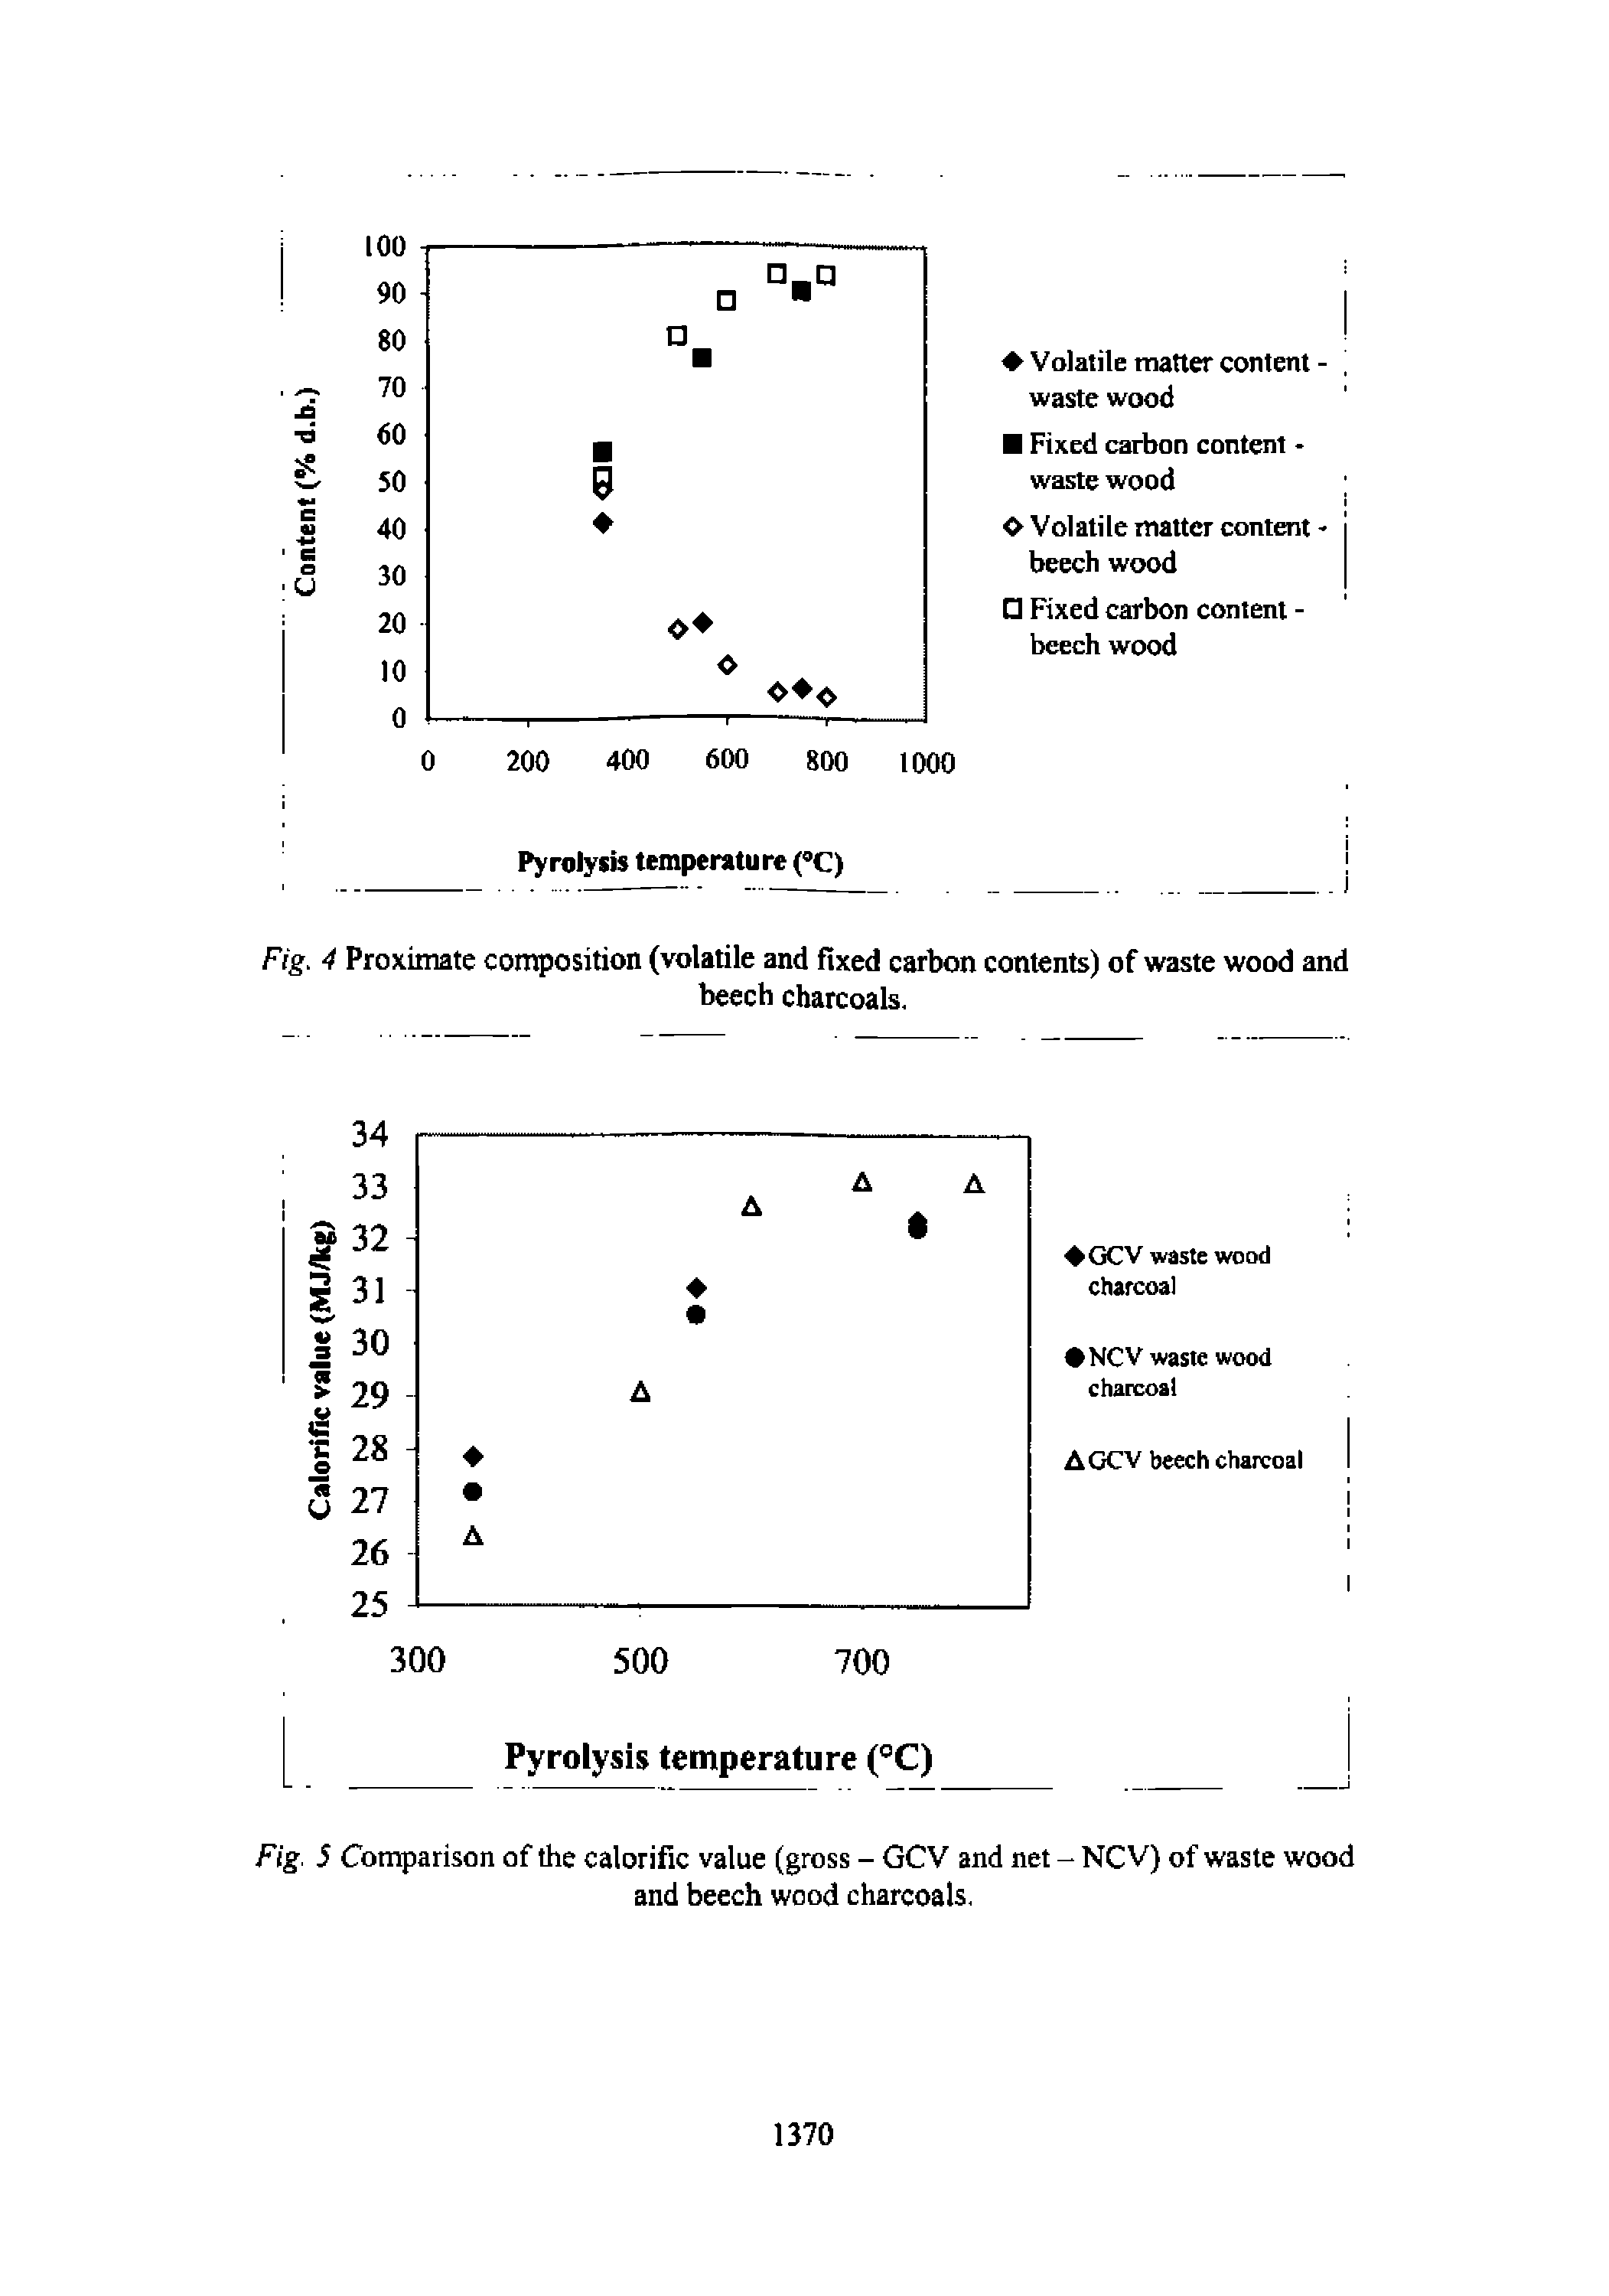 Fig. 5 Comparison of the calorific value (gross - GCV and net - NCV) of waste wood...